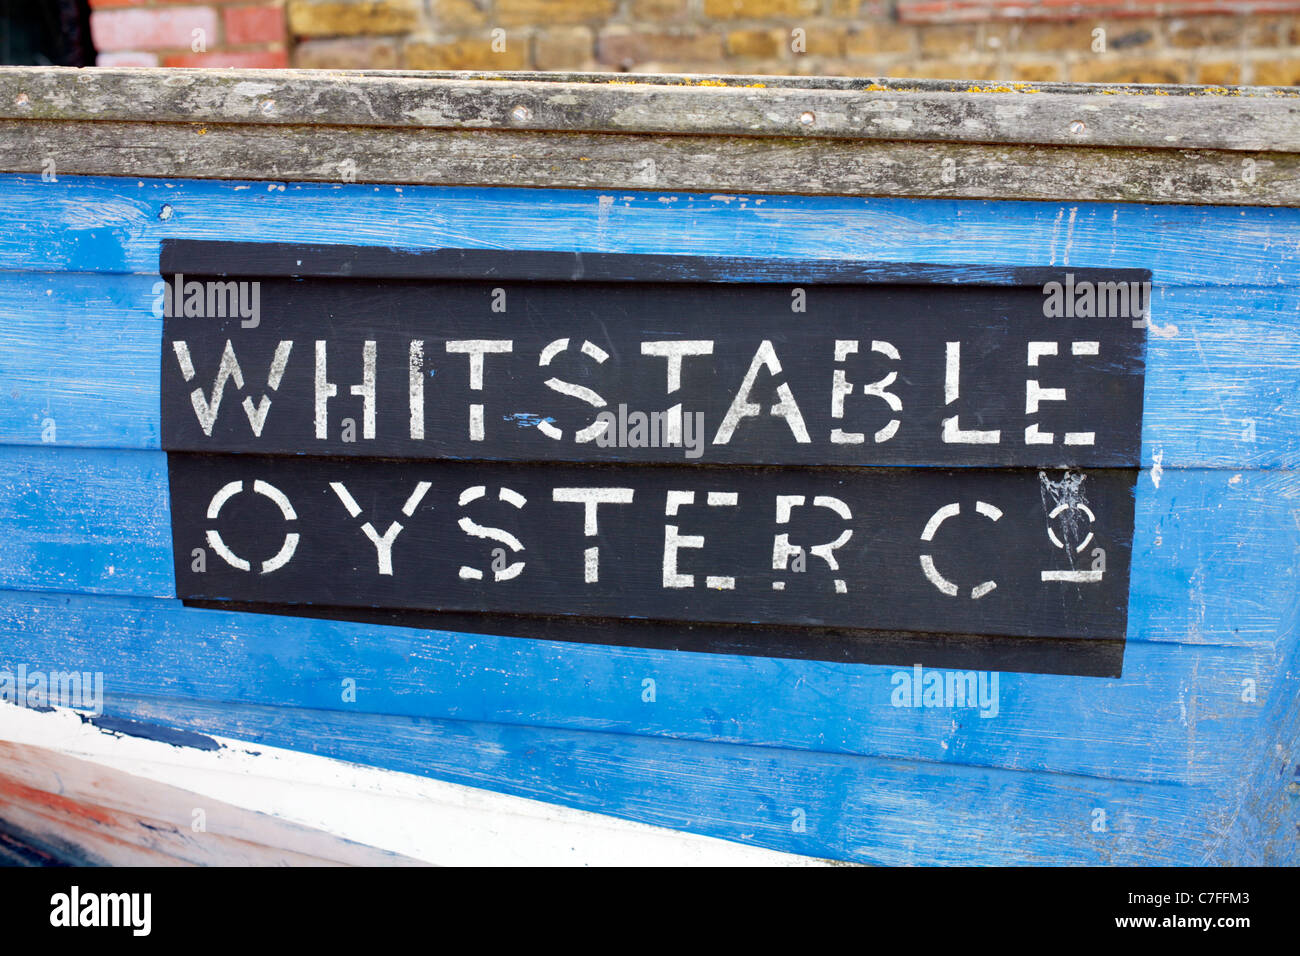 Boot am Strand in Whitstable Werbung Whitstable Oyster Co. Stockfoto